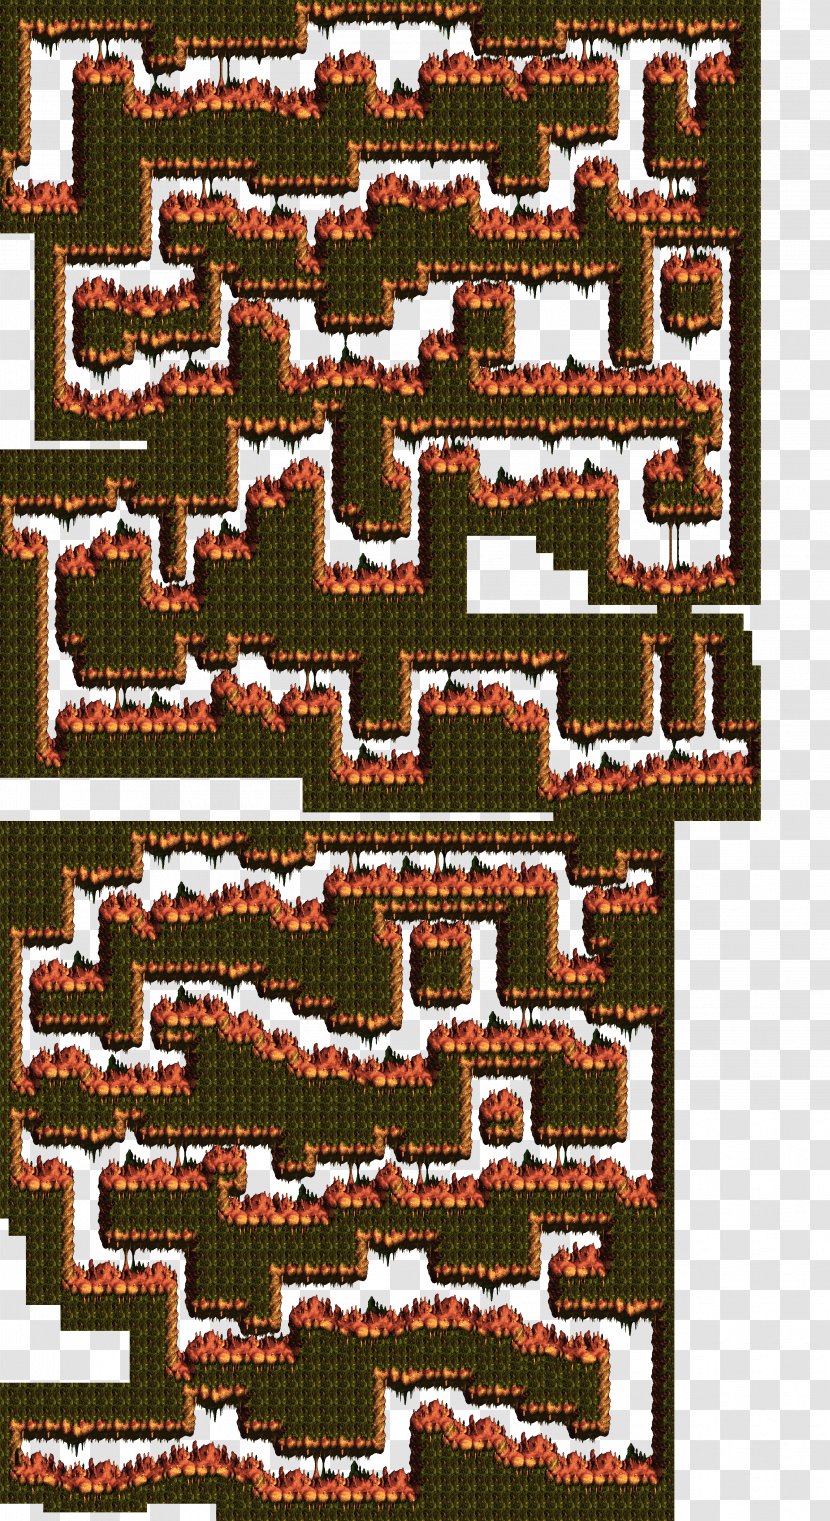 Donkey Kong Country 3: Dixie Kong's Double Trouble! 2: Diddy's Quest Returns Land 2 - Game Boy Advance - Boardwalk Top View Transparent PNG